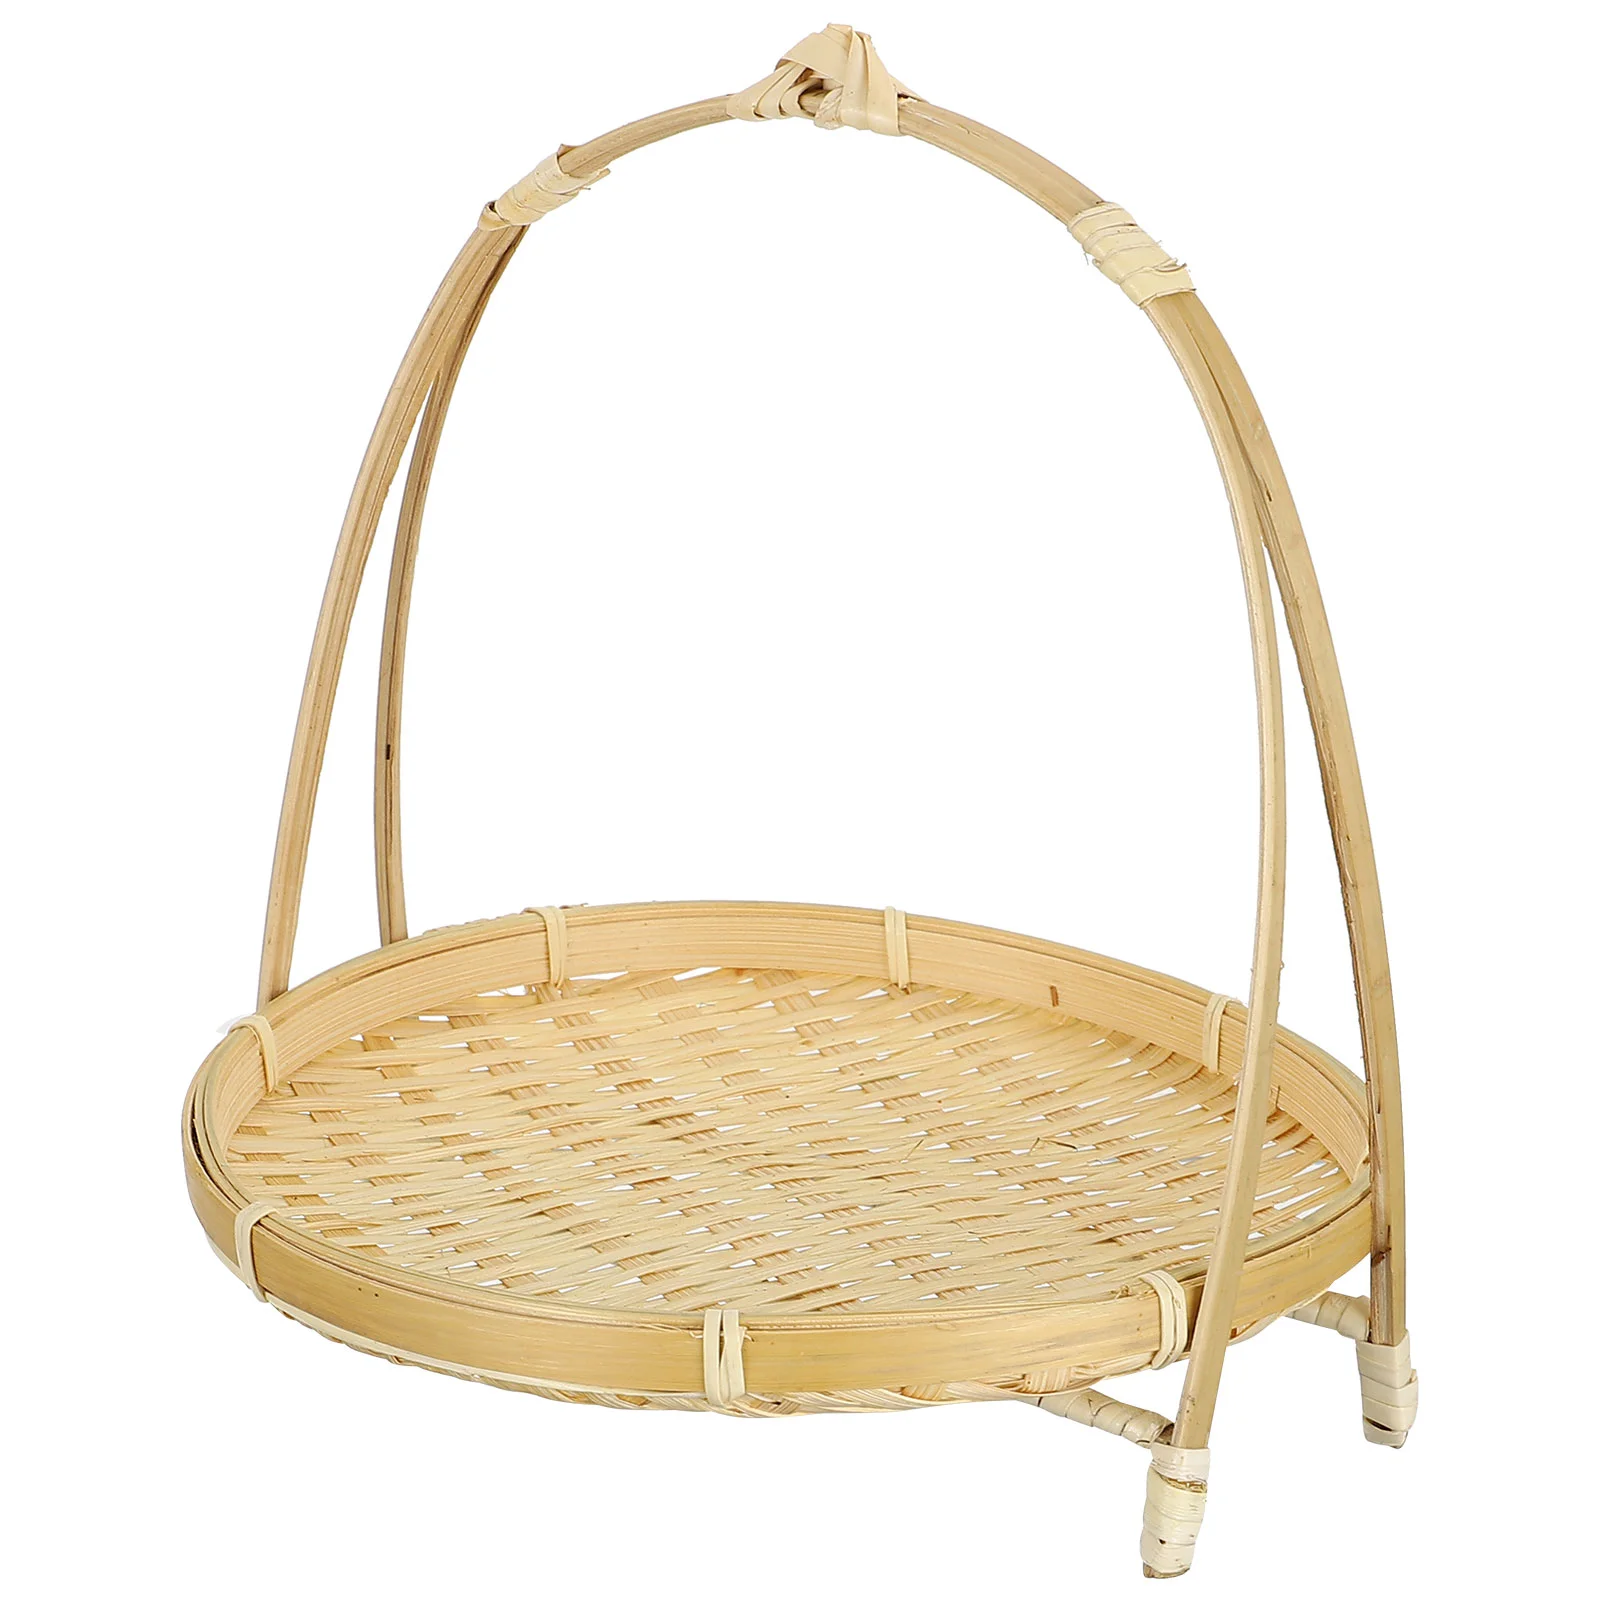 

Basket Storage Bamboo Wicker Fruit Serving Woven Bowl Baskets Willow Handle Rattan Kitchen Picnic Tray Snack Tote Bread Weaving